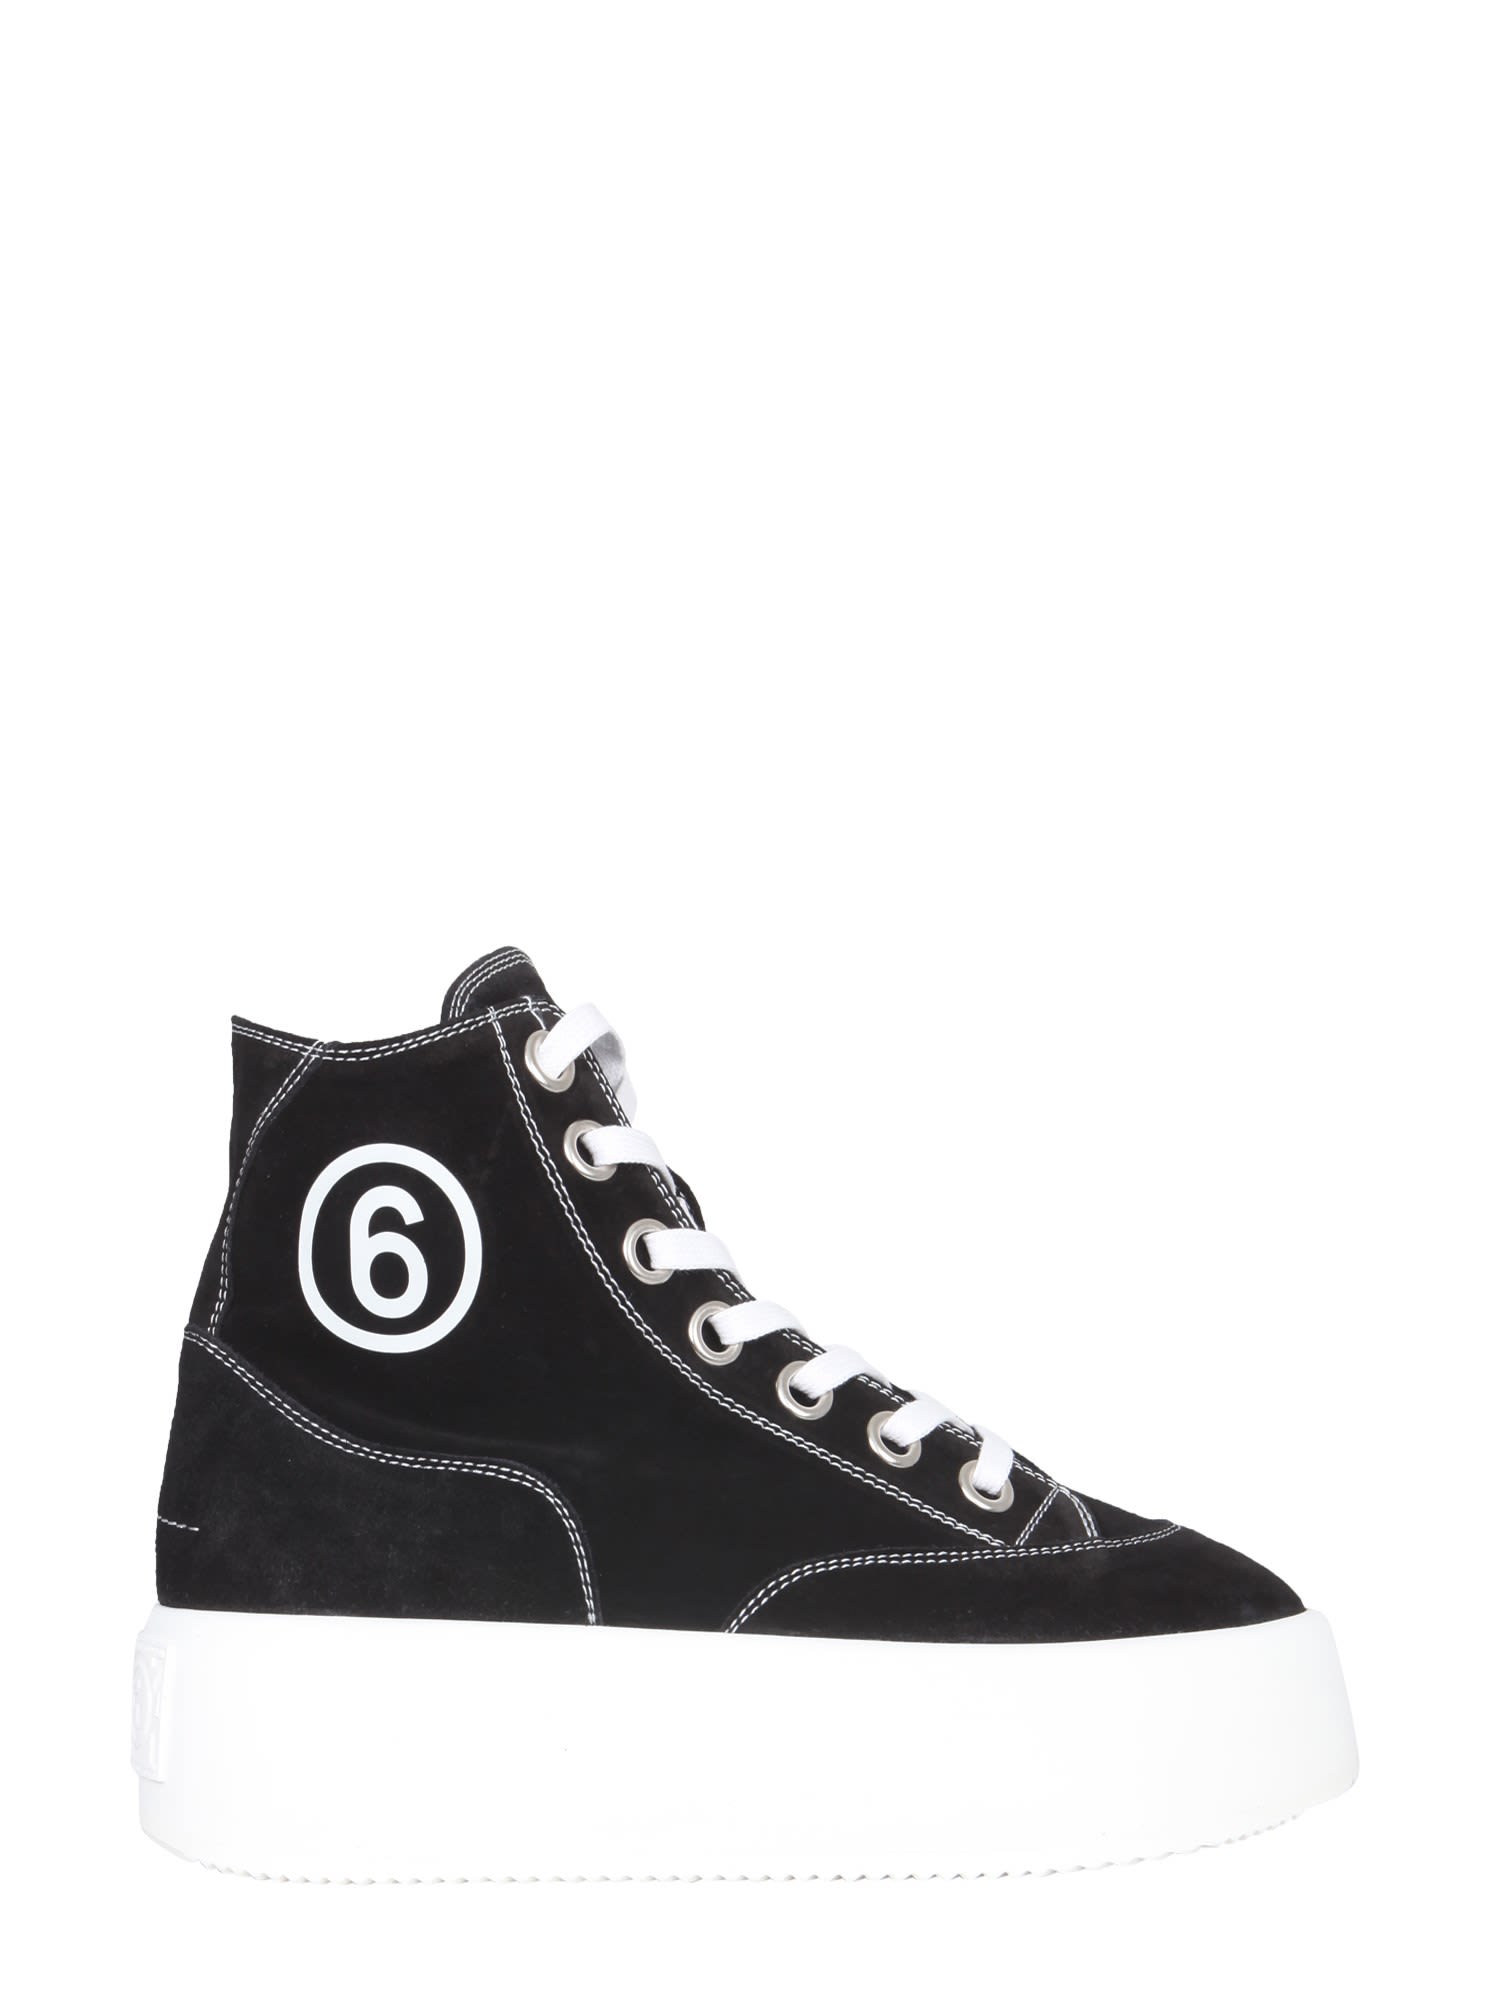 MM6 Maison Margiela Suede High Sneakers